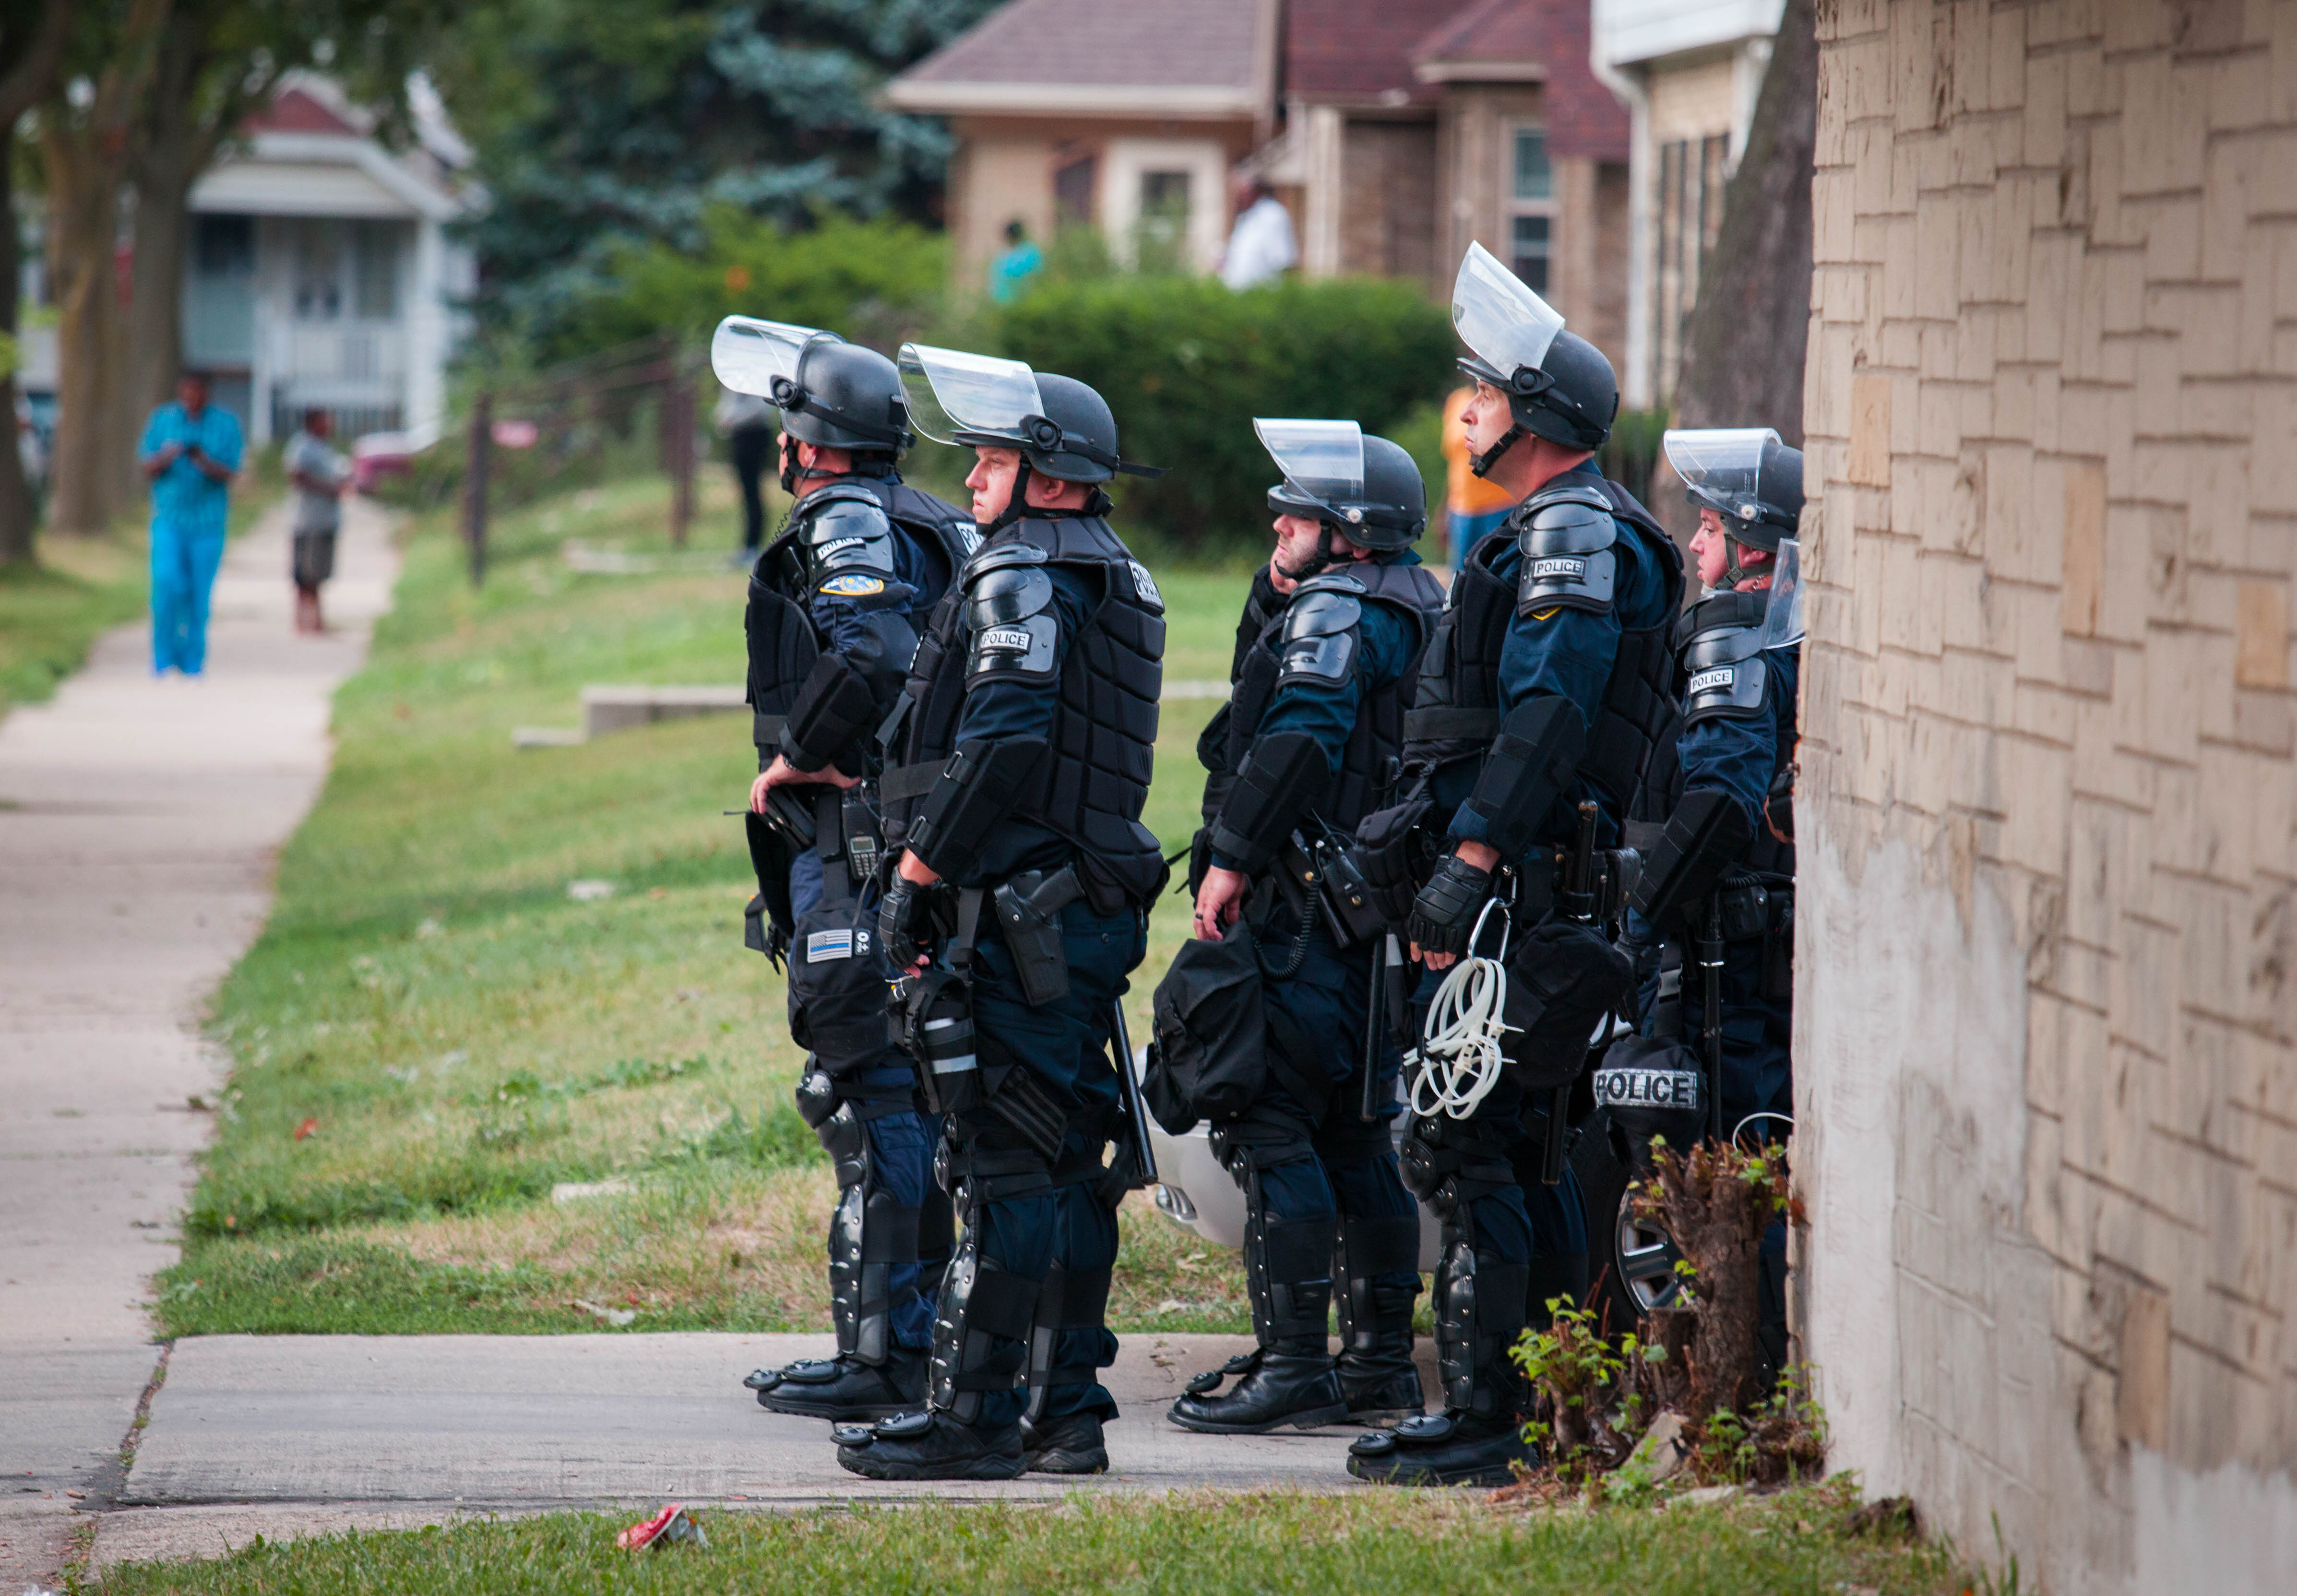 Police in riot gear wait in an alley after a second night of clashes between protestors and police in Milwaukee, Wisc., on Aug. 15, 2016. (Darren Hauck—Getty Images)